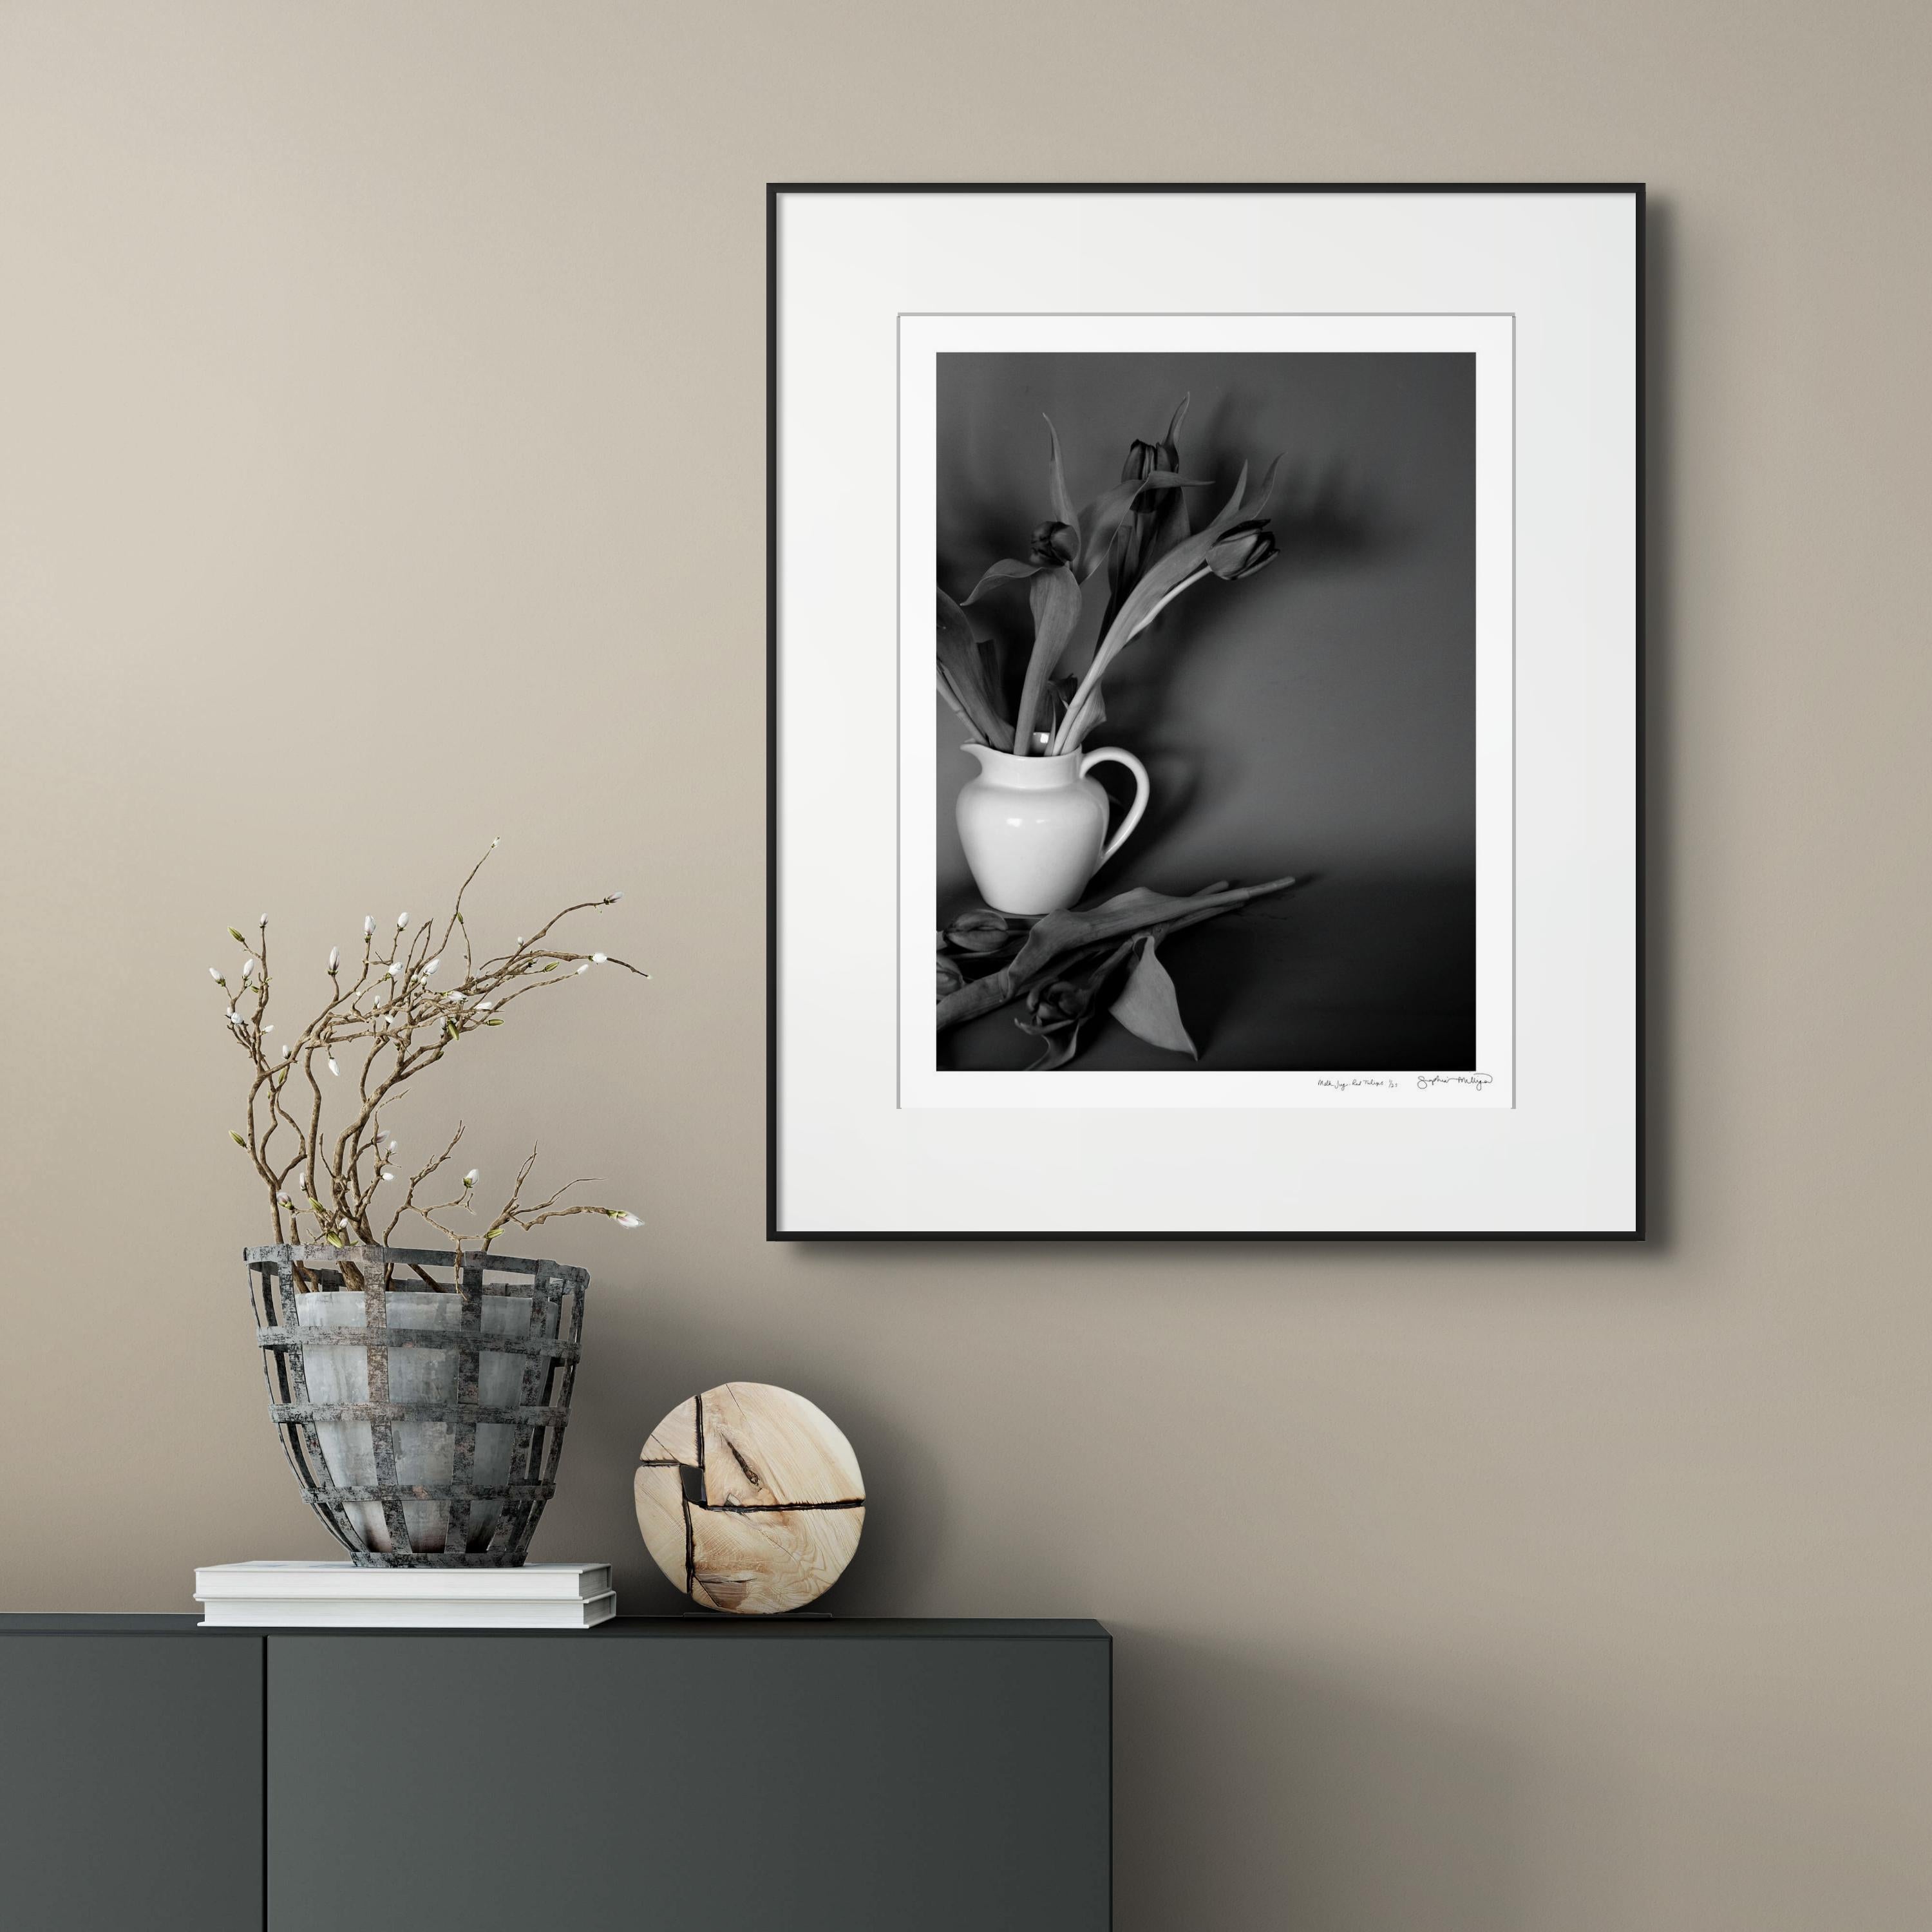 'Milk Jug, Red Tulips' 
Limited edition (1 of 25) archival black and white photograph. Unframed.
_________________
Sophia's poetic photographs are an exploration of the balance in all things: in the sensual interplay of light and shadow; in virile